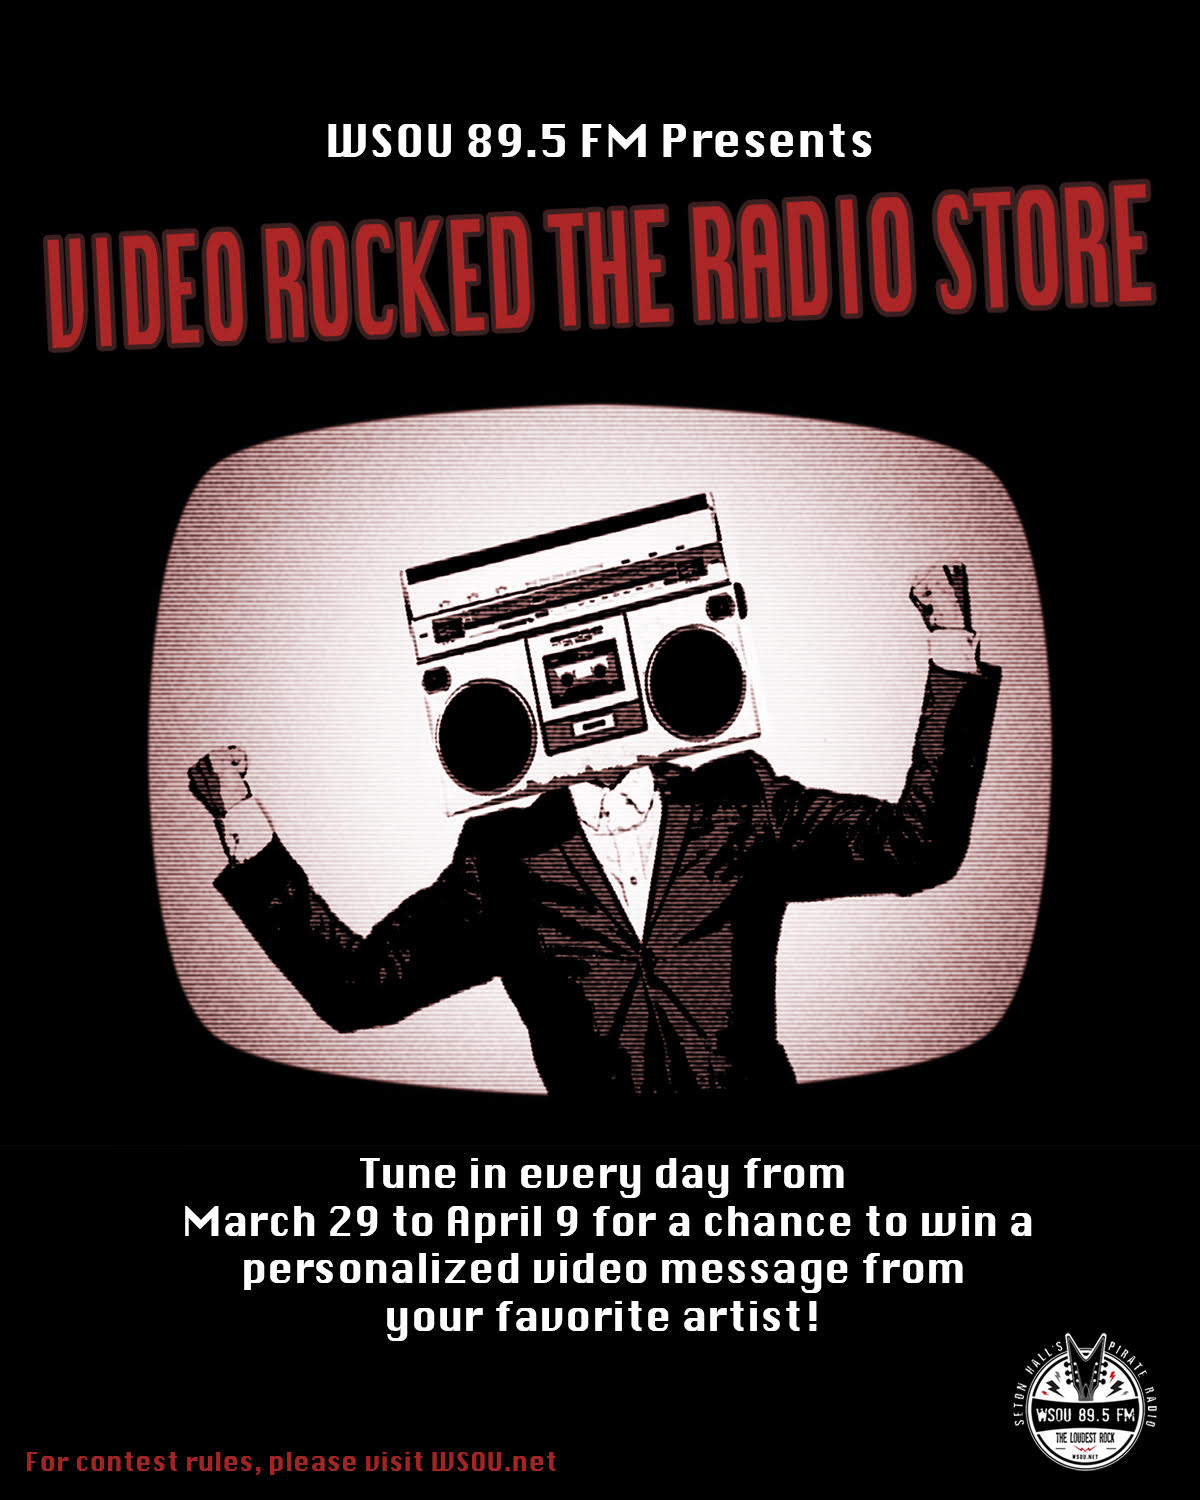 WSOU 89.5 FM Presents
VIDEO ROCKED THE RADIO STORE
Tune in every day from March 29 to April 9 for a chance to win a personalized video message from your favorite artist!
For contest rules, please visit WSOU.net